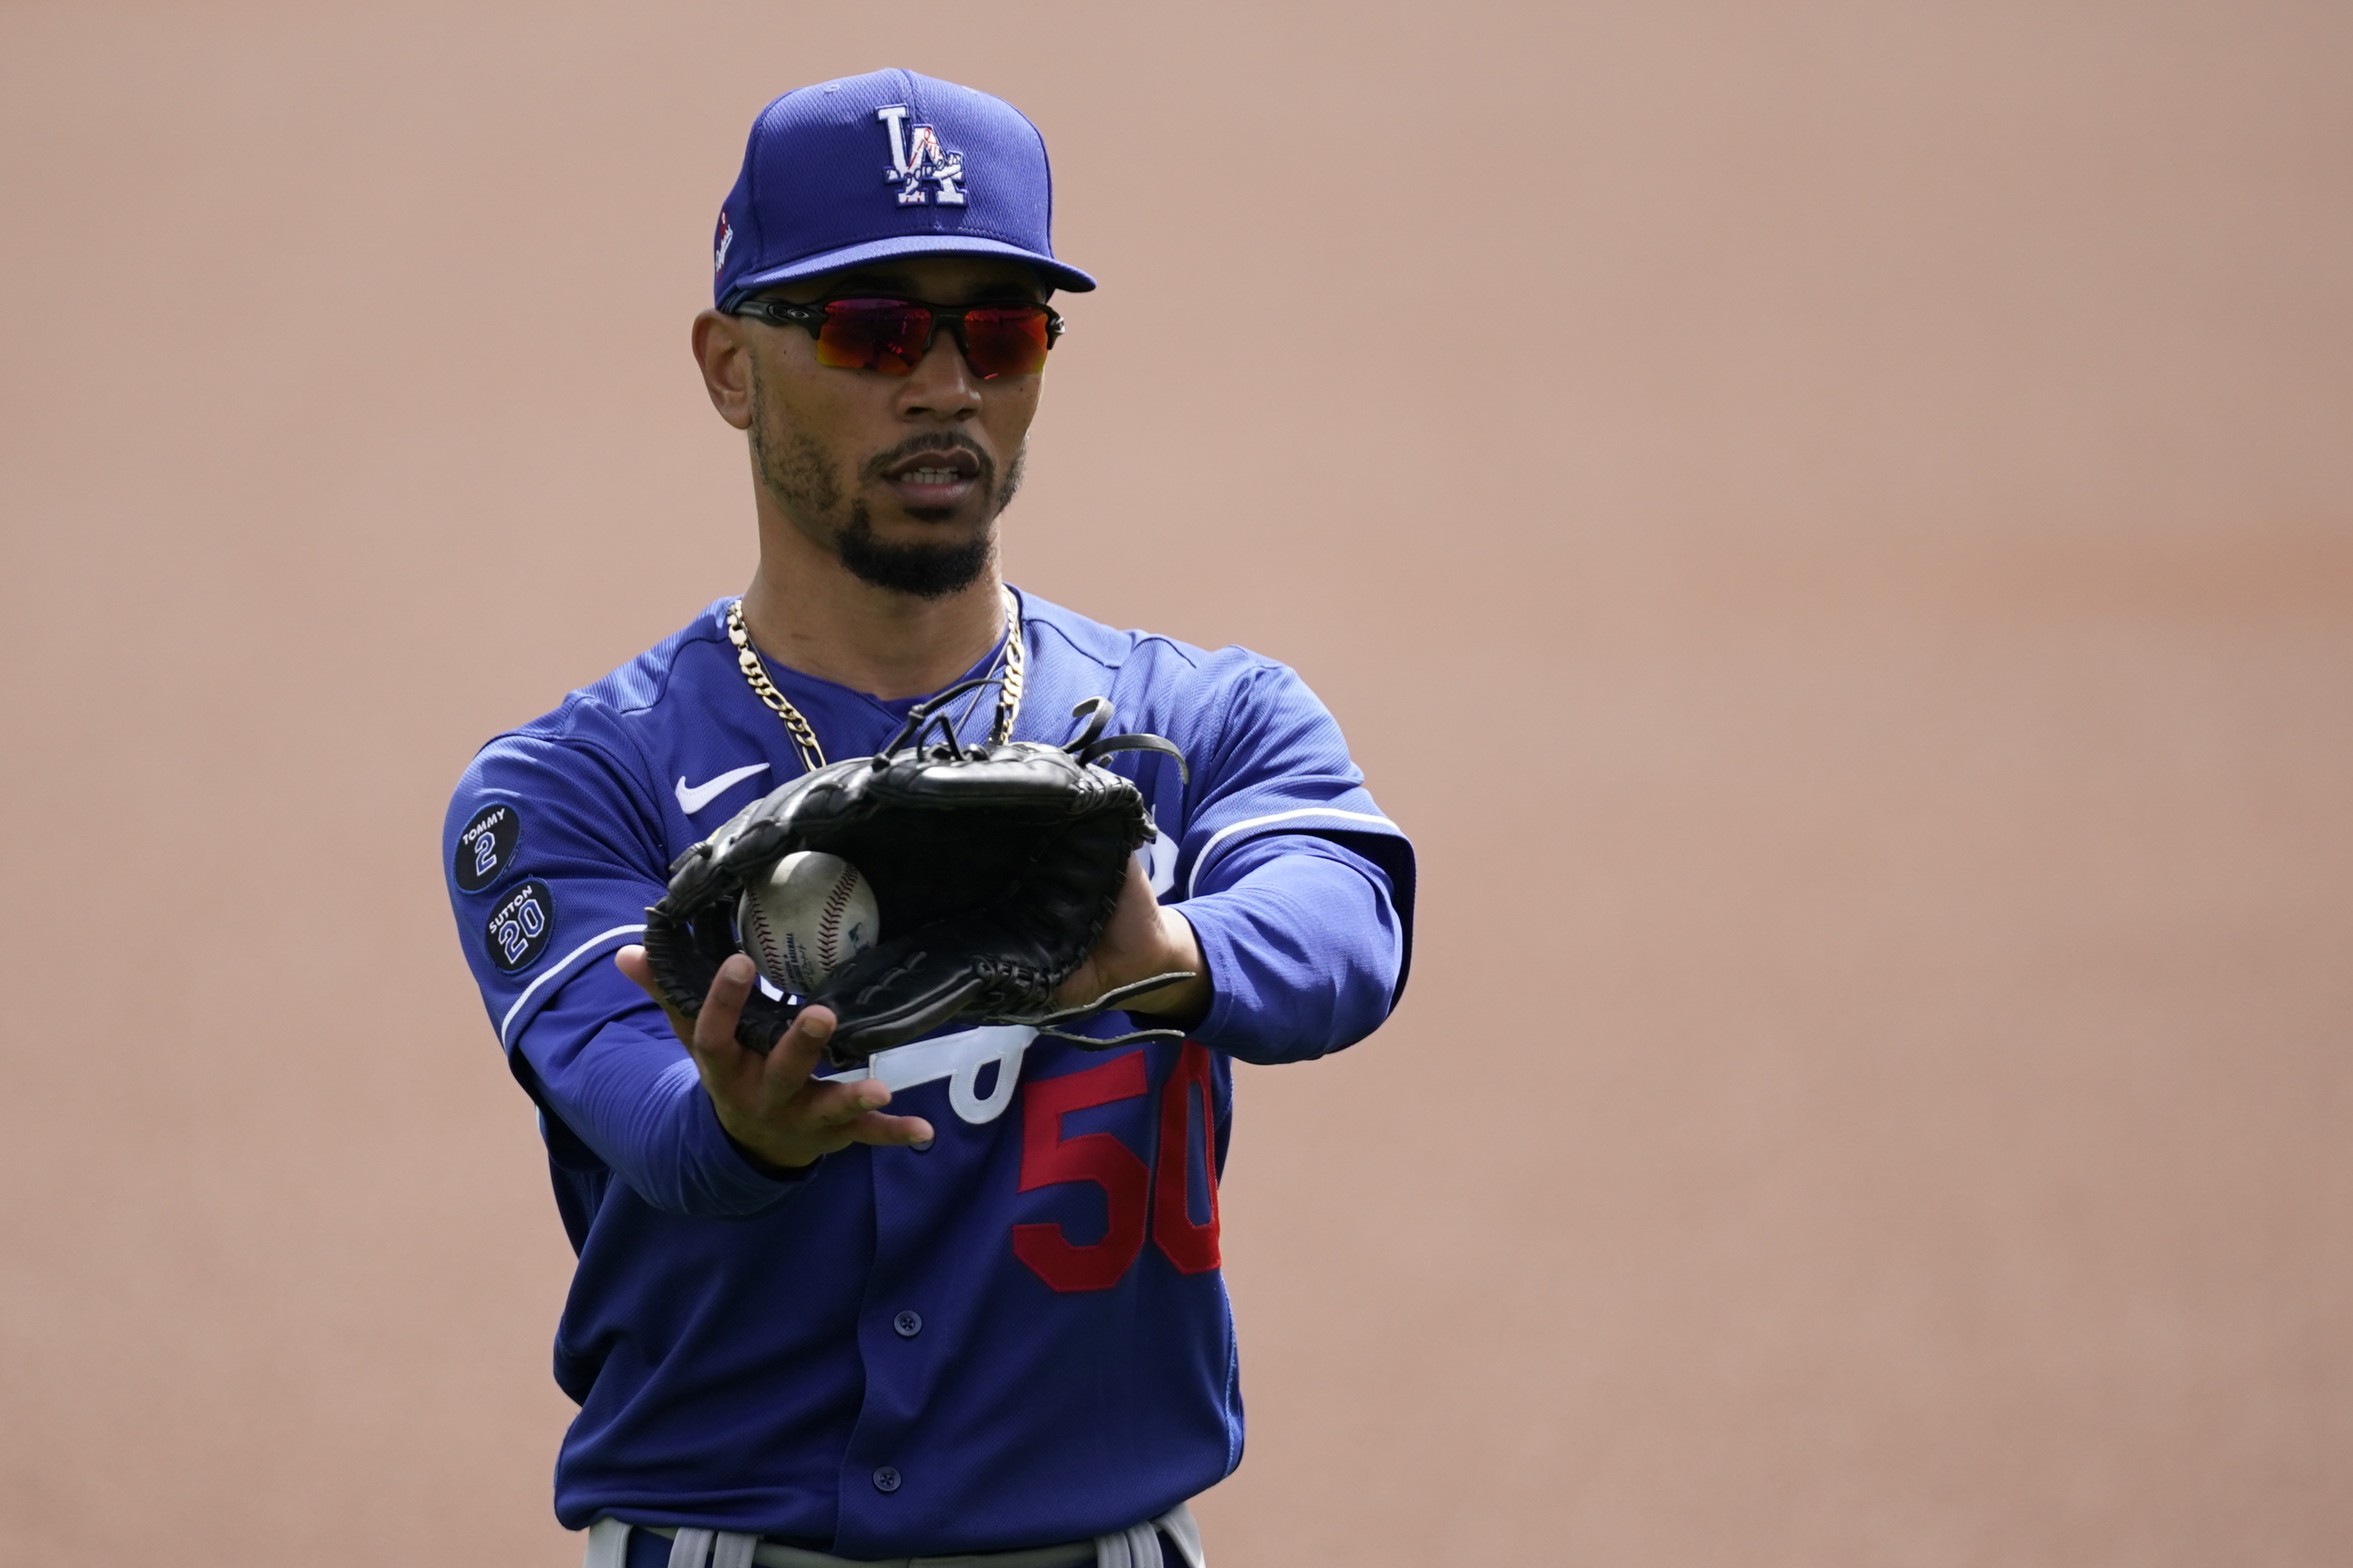 Former Red Sox star Mookie Betts struggling as Dodgers face